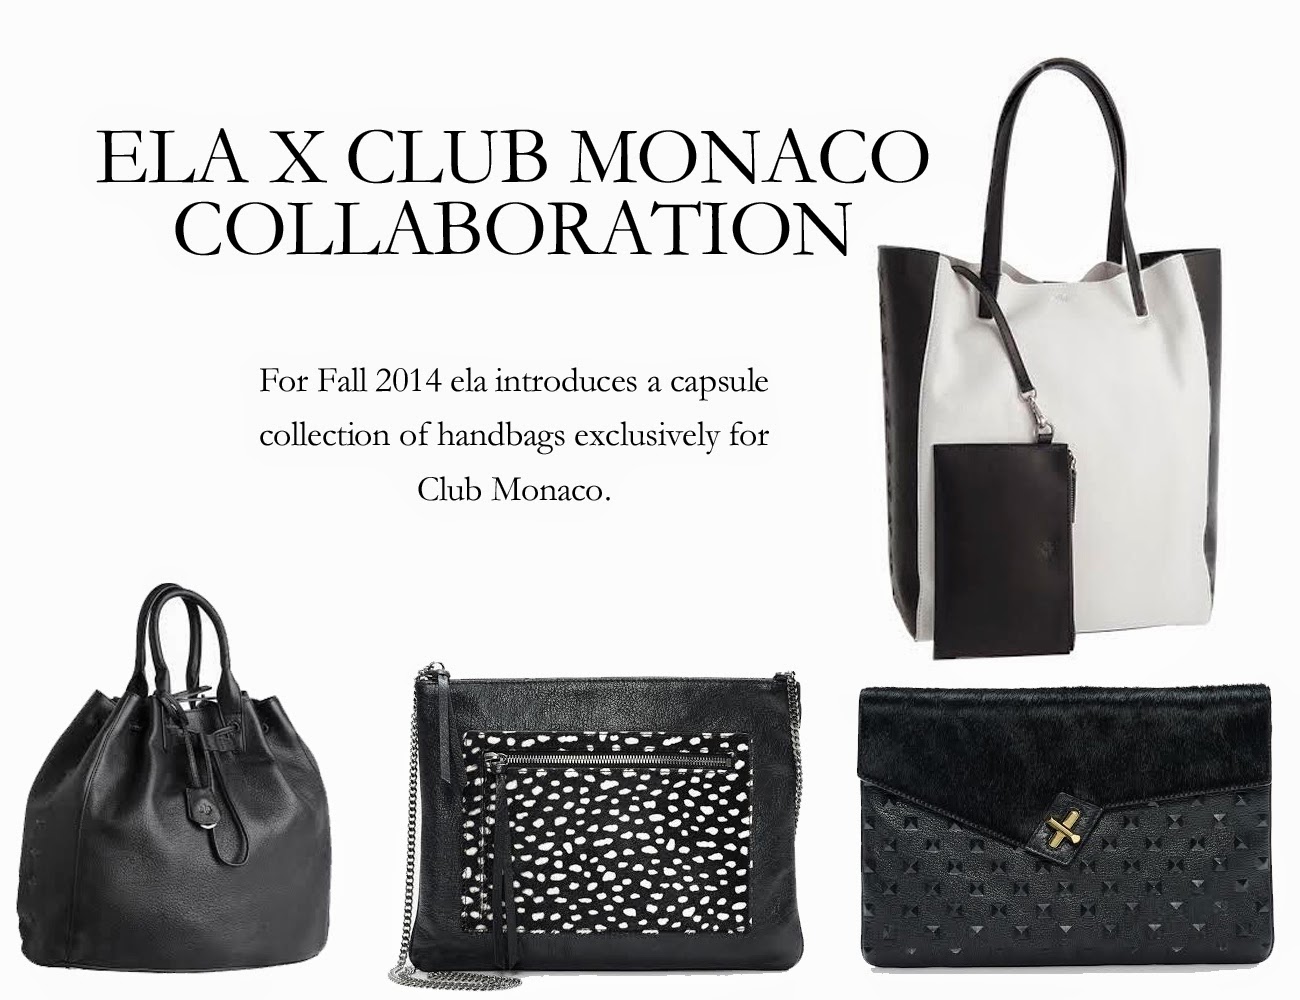 For Fall 2014 ela introduces a capsule collection of handbags exclusively for Club Monaco.